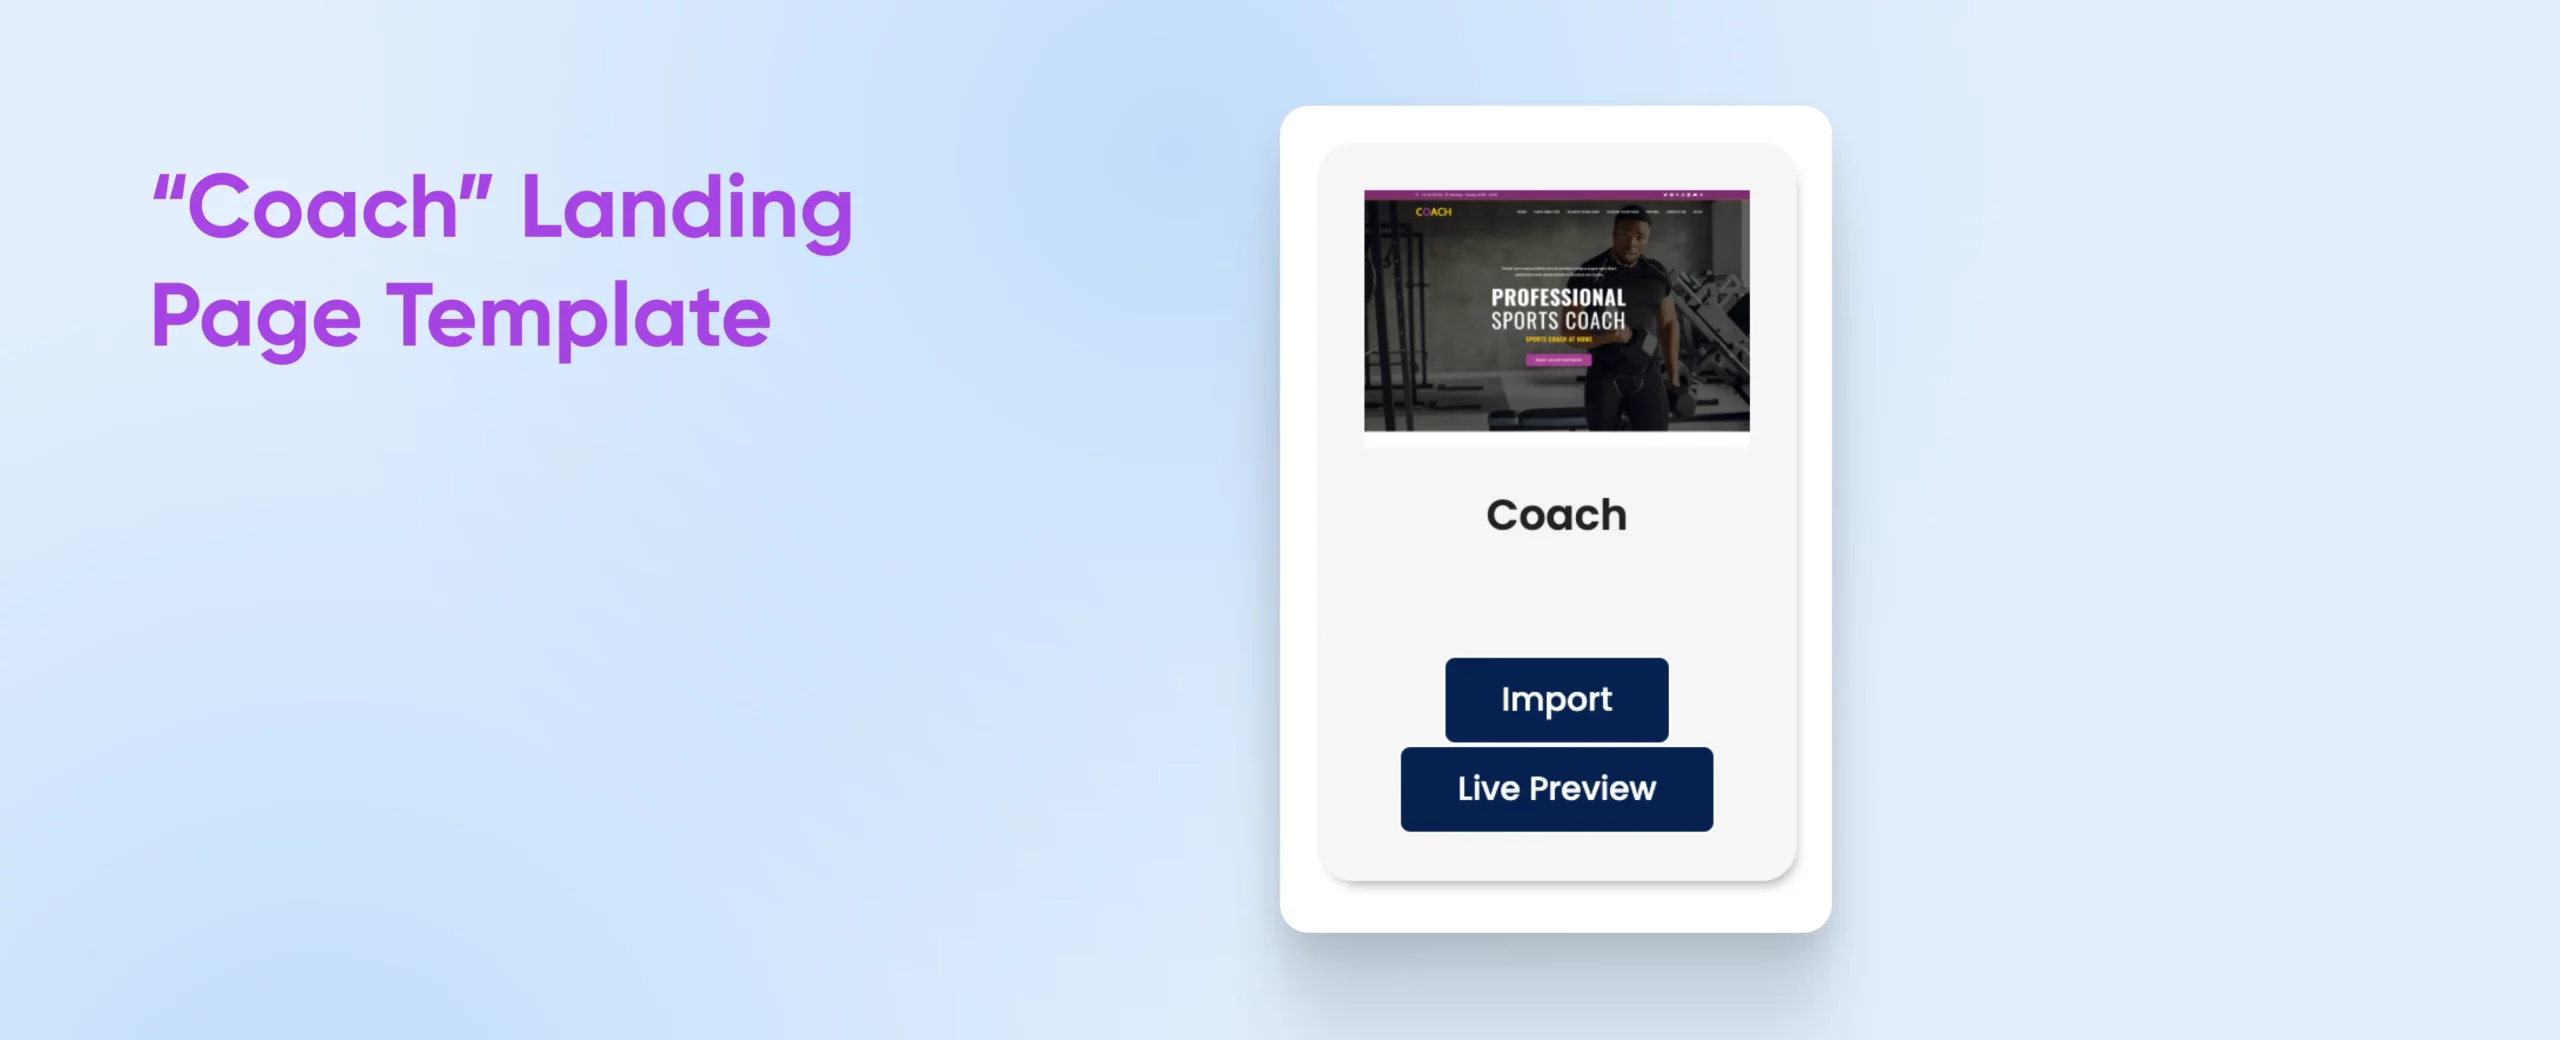 "Coach" Landing Page Template with the screenshot of the demo and buttons for "Import" and "Live Preview."